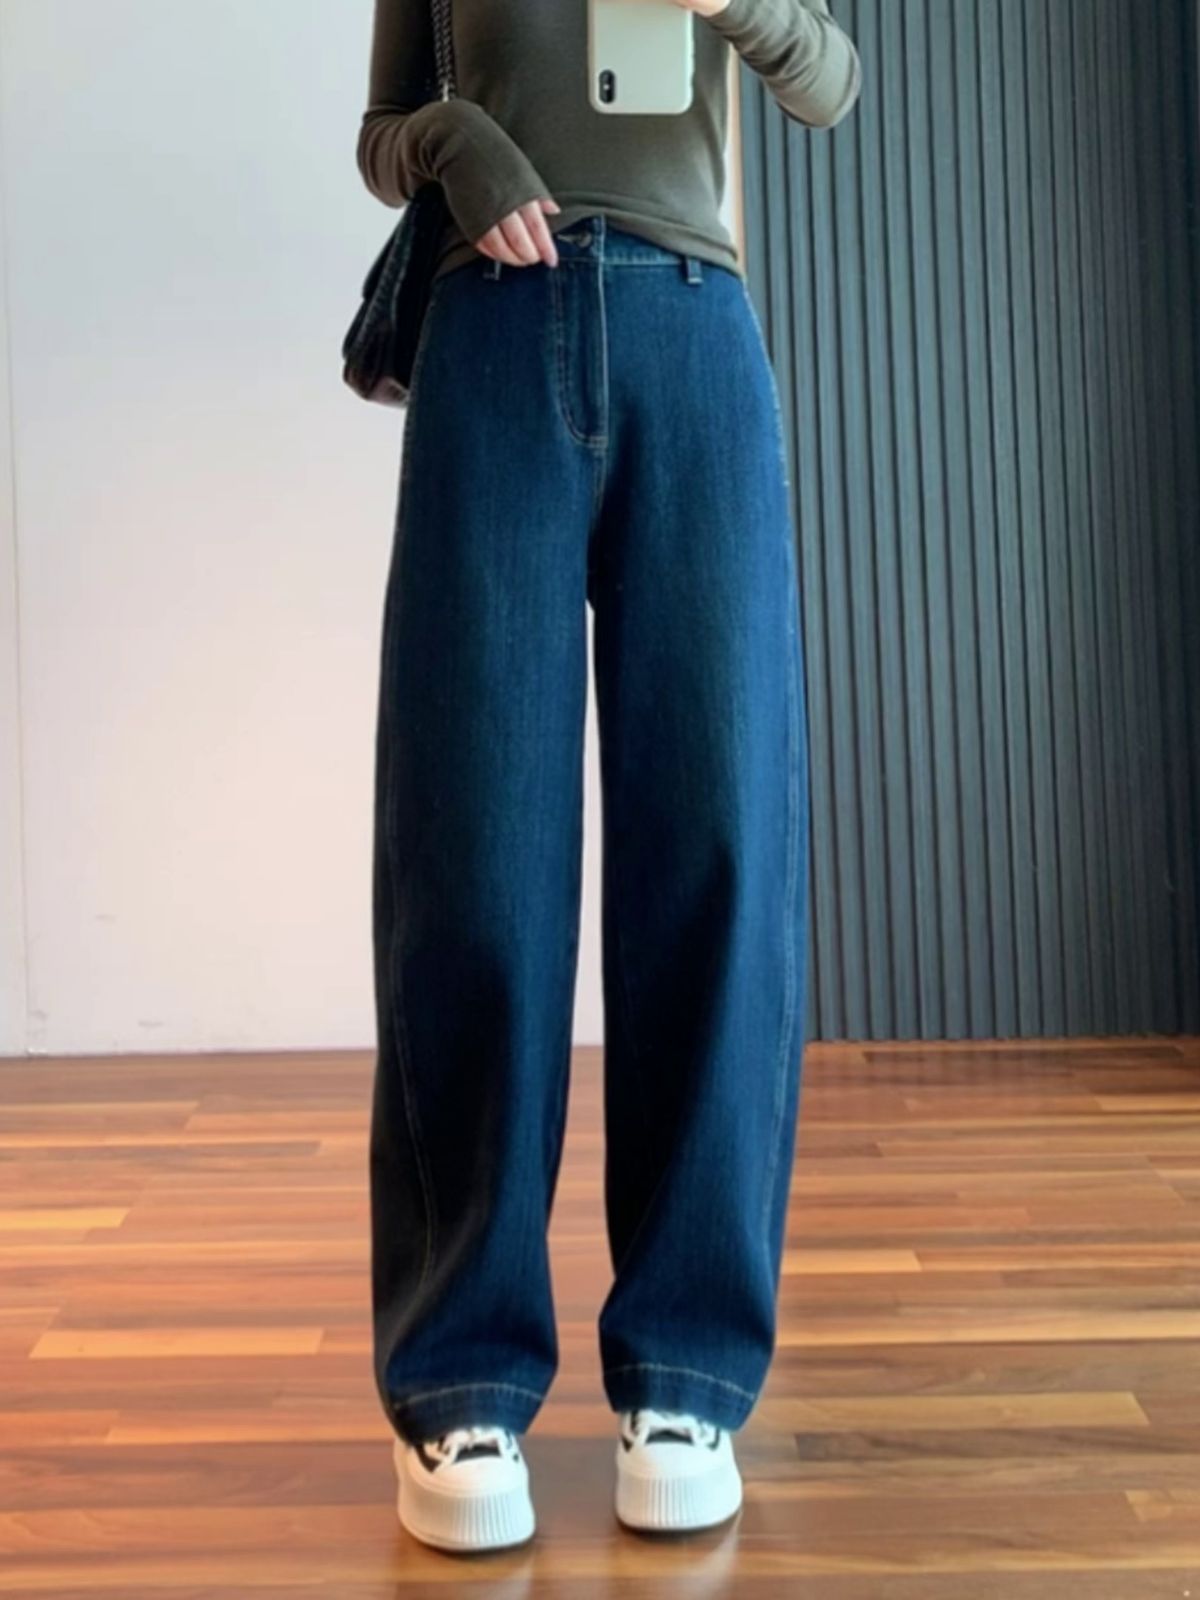 B * V Style Super Love Italy Banana Pants Super Elastic Profile High Waist Slimming All-Matching Straight Wide Leg Jeans for Women Autumn